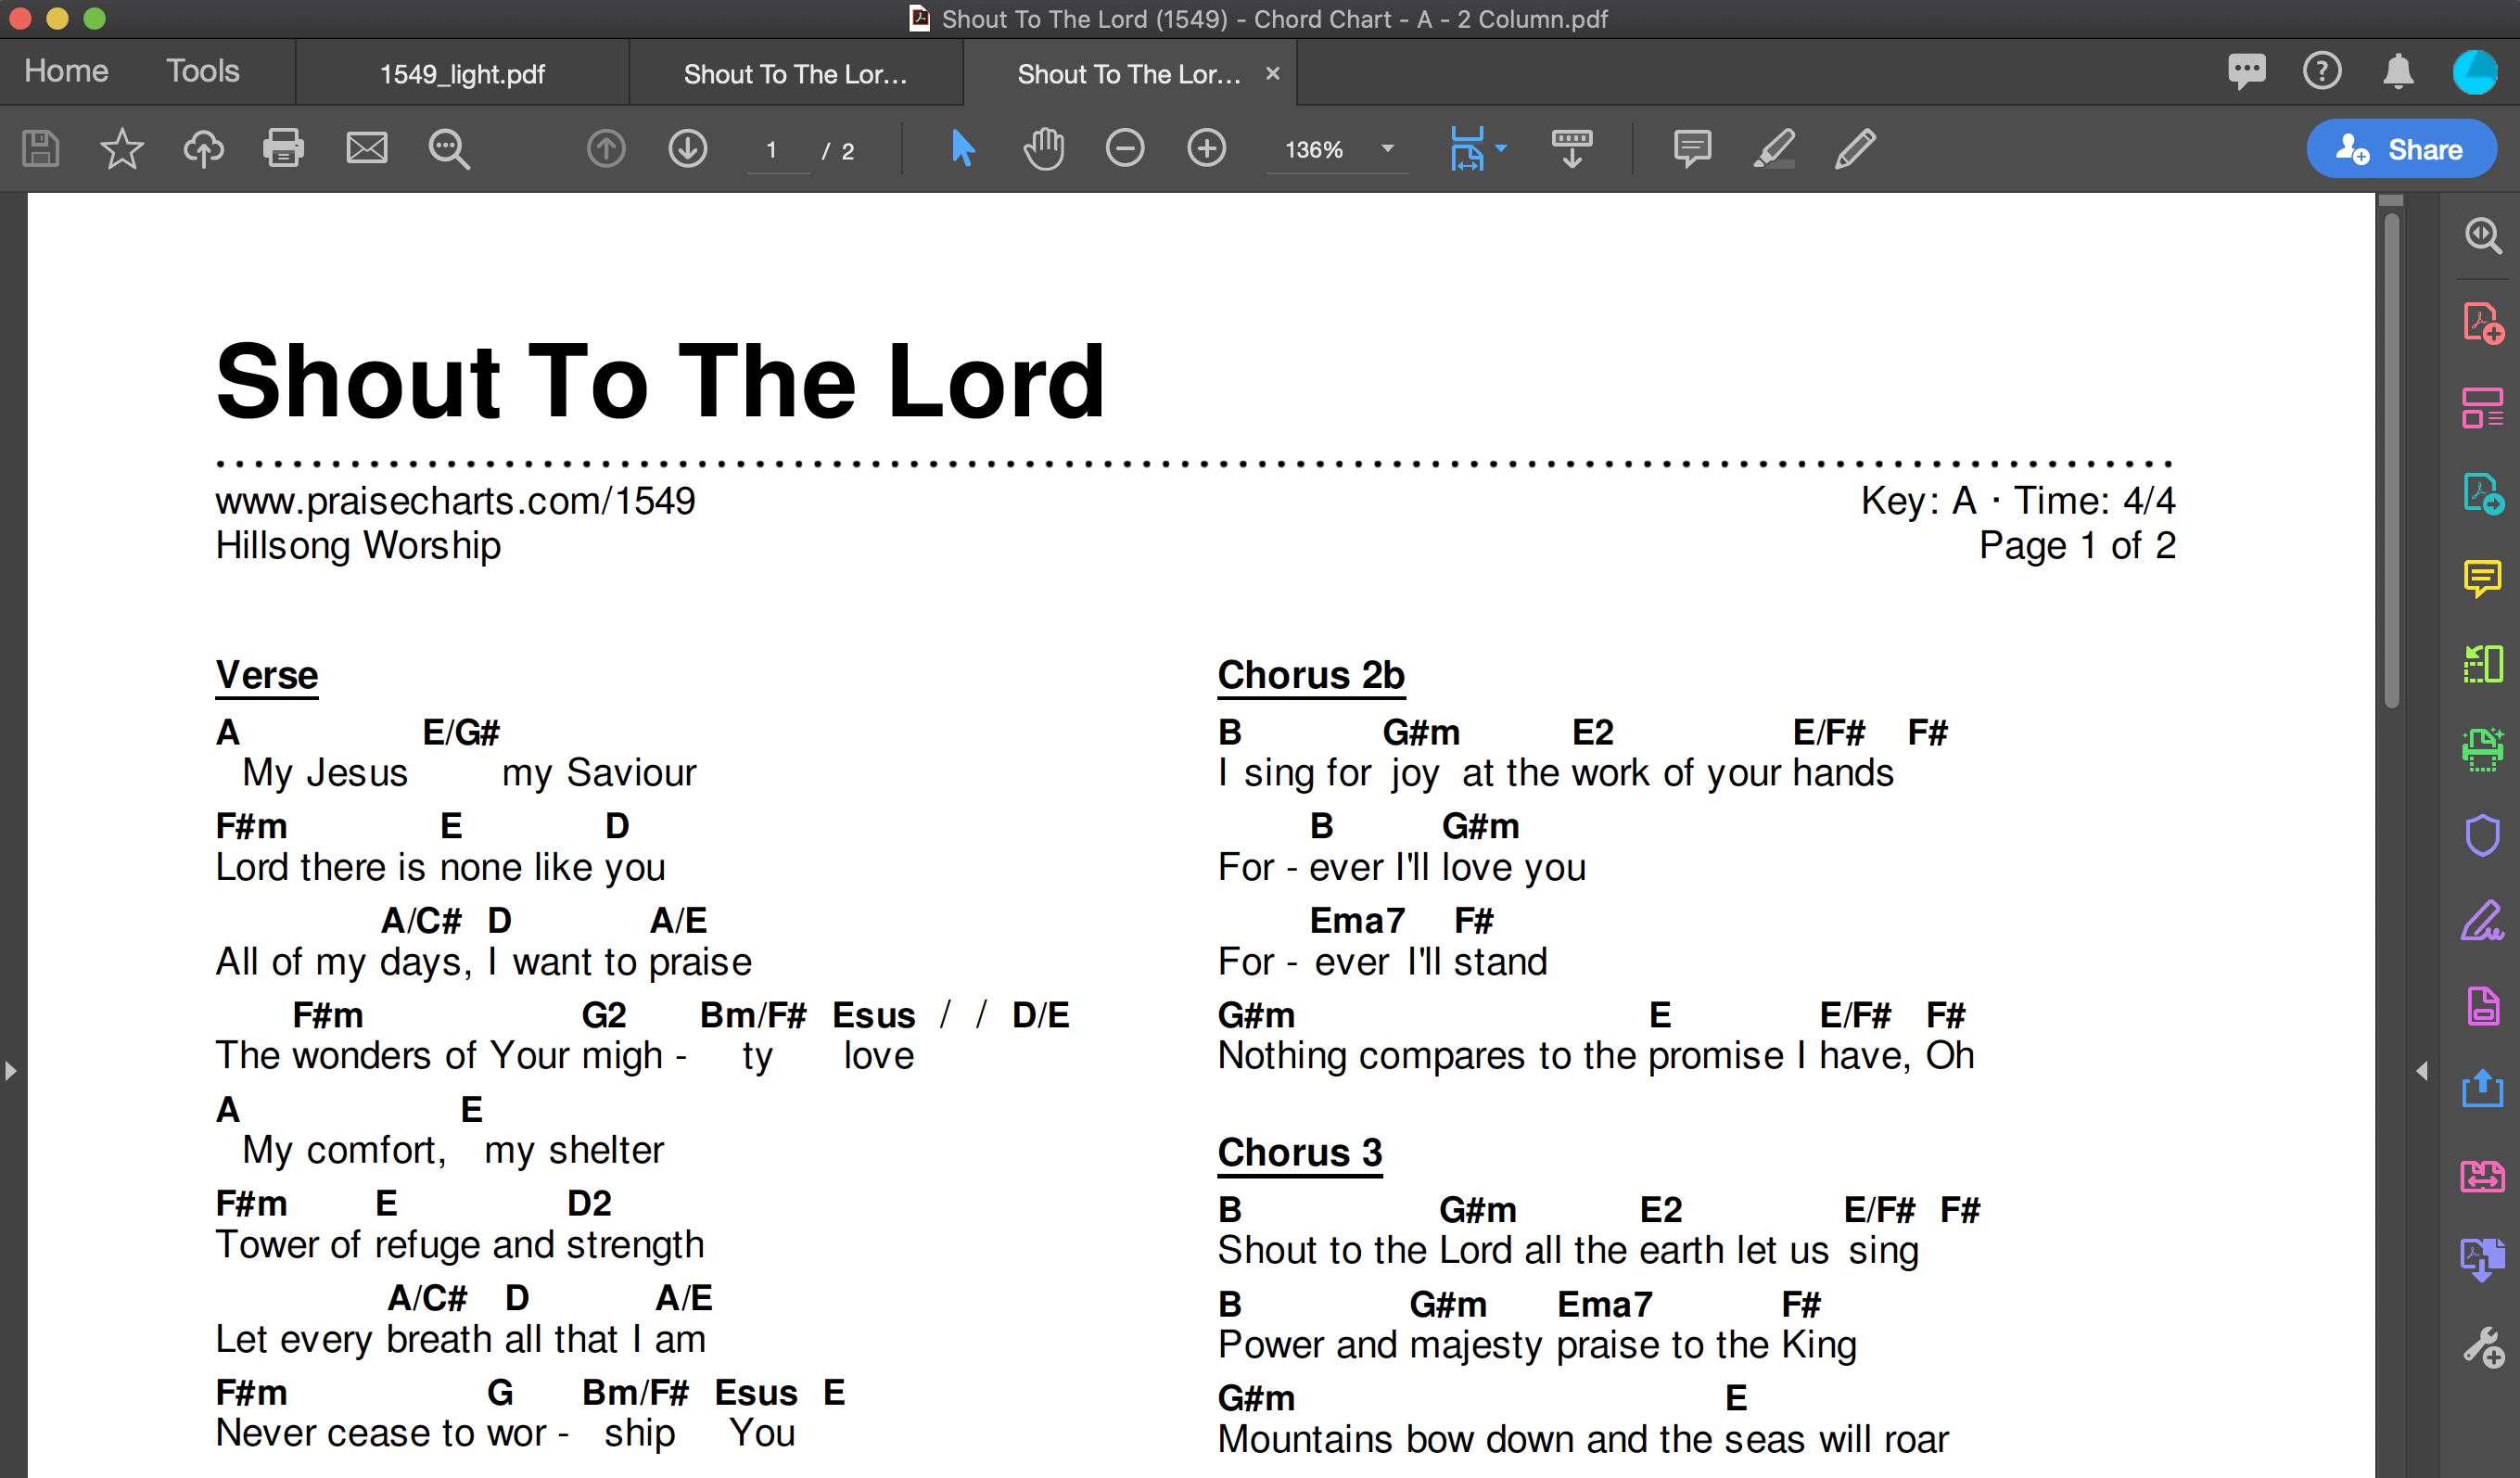 Chord Chart for planetboom's 'I Believe' 🎵🗒, Chord Chart for planetboom's  'I Believe' 🎵🗒 Screenshot to use in your own youth ministry💥  #youmethechurchthatsussidea #planetboom #planetshakers #youth, By  Planetshakers